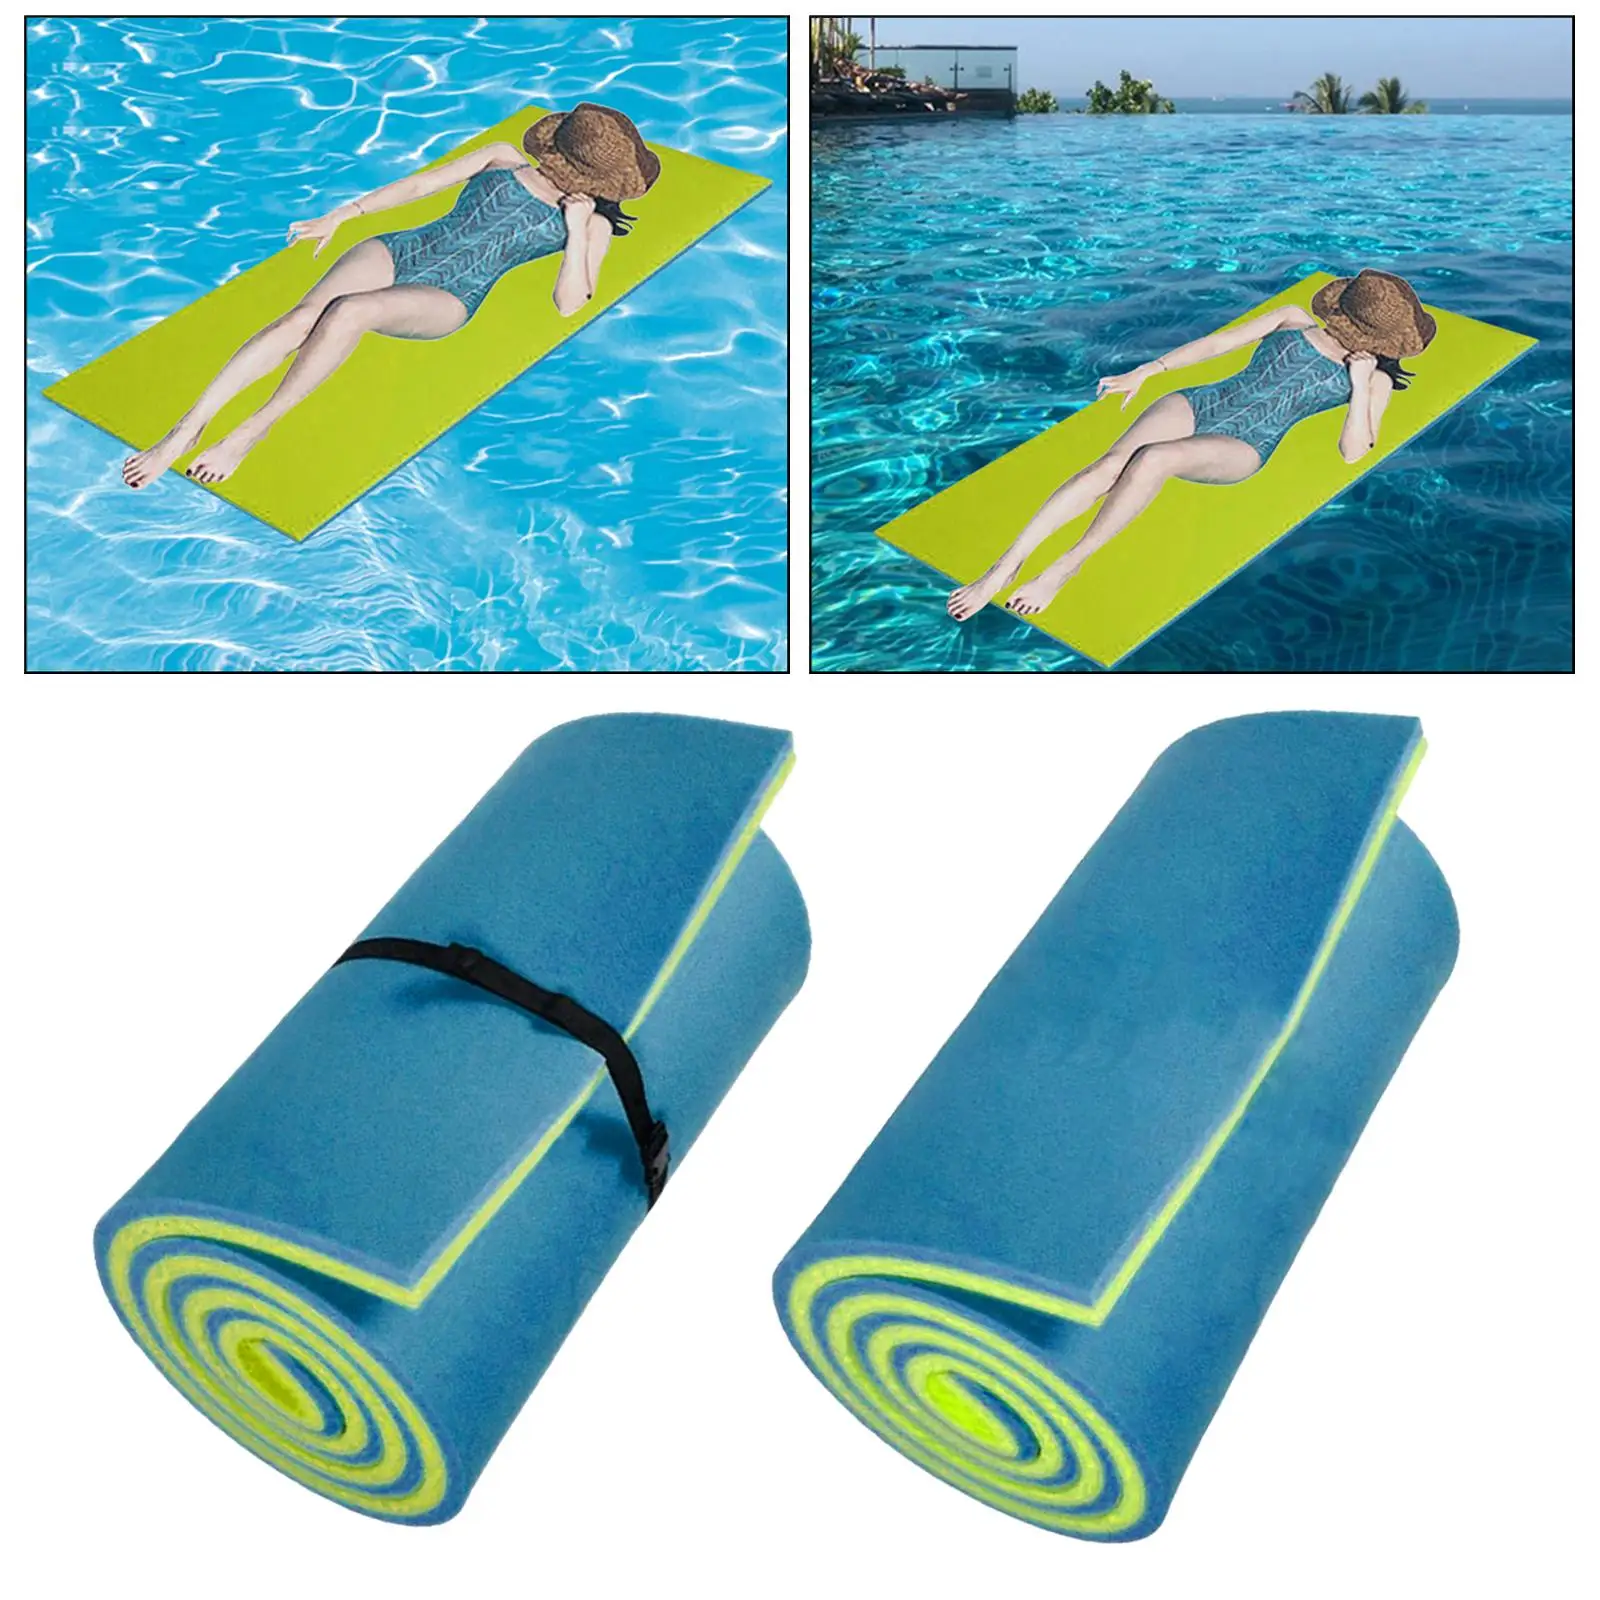 Water Floating Mat Lounger Floating Raft for Summer Outdoor